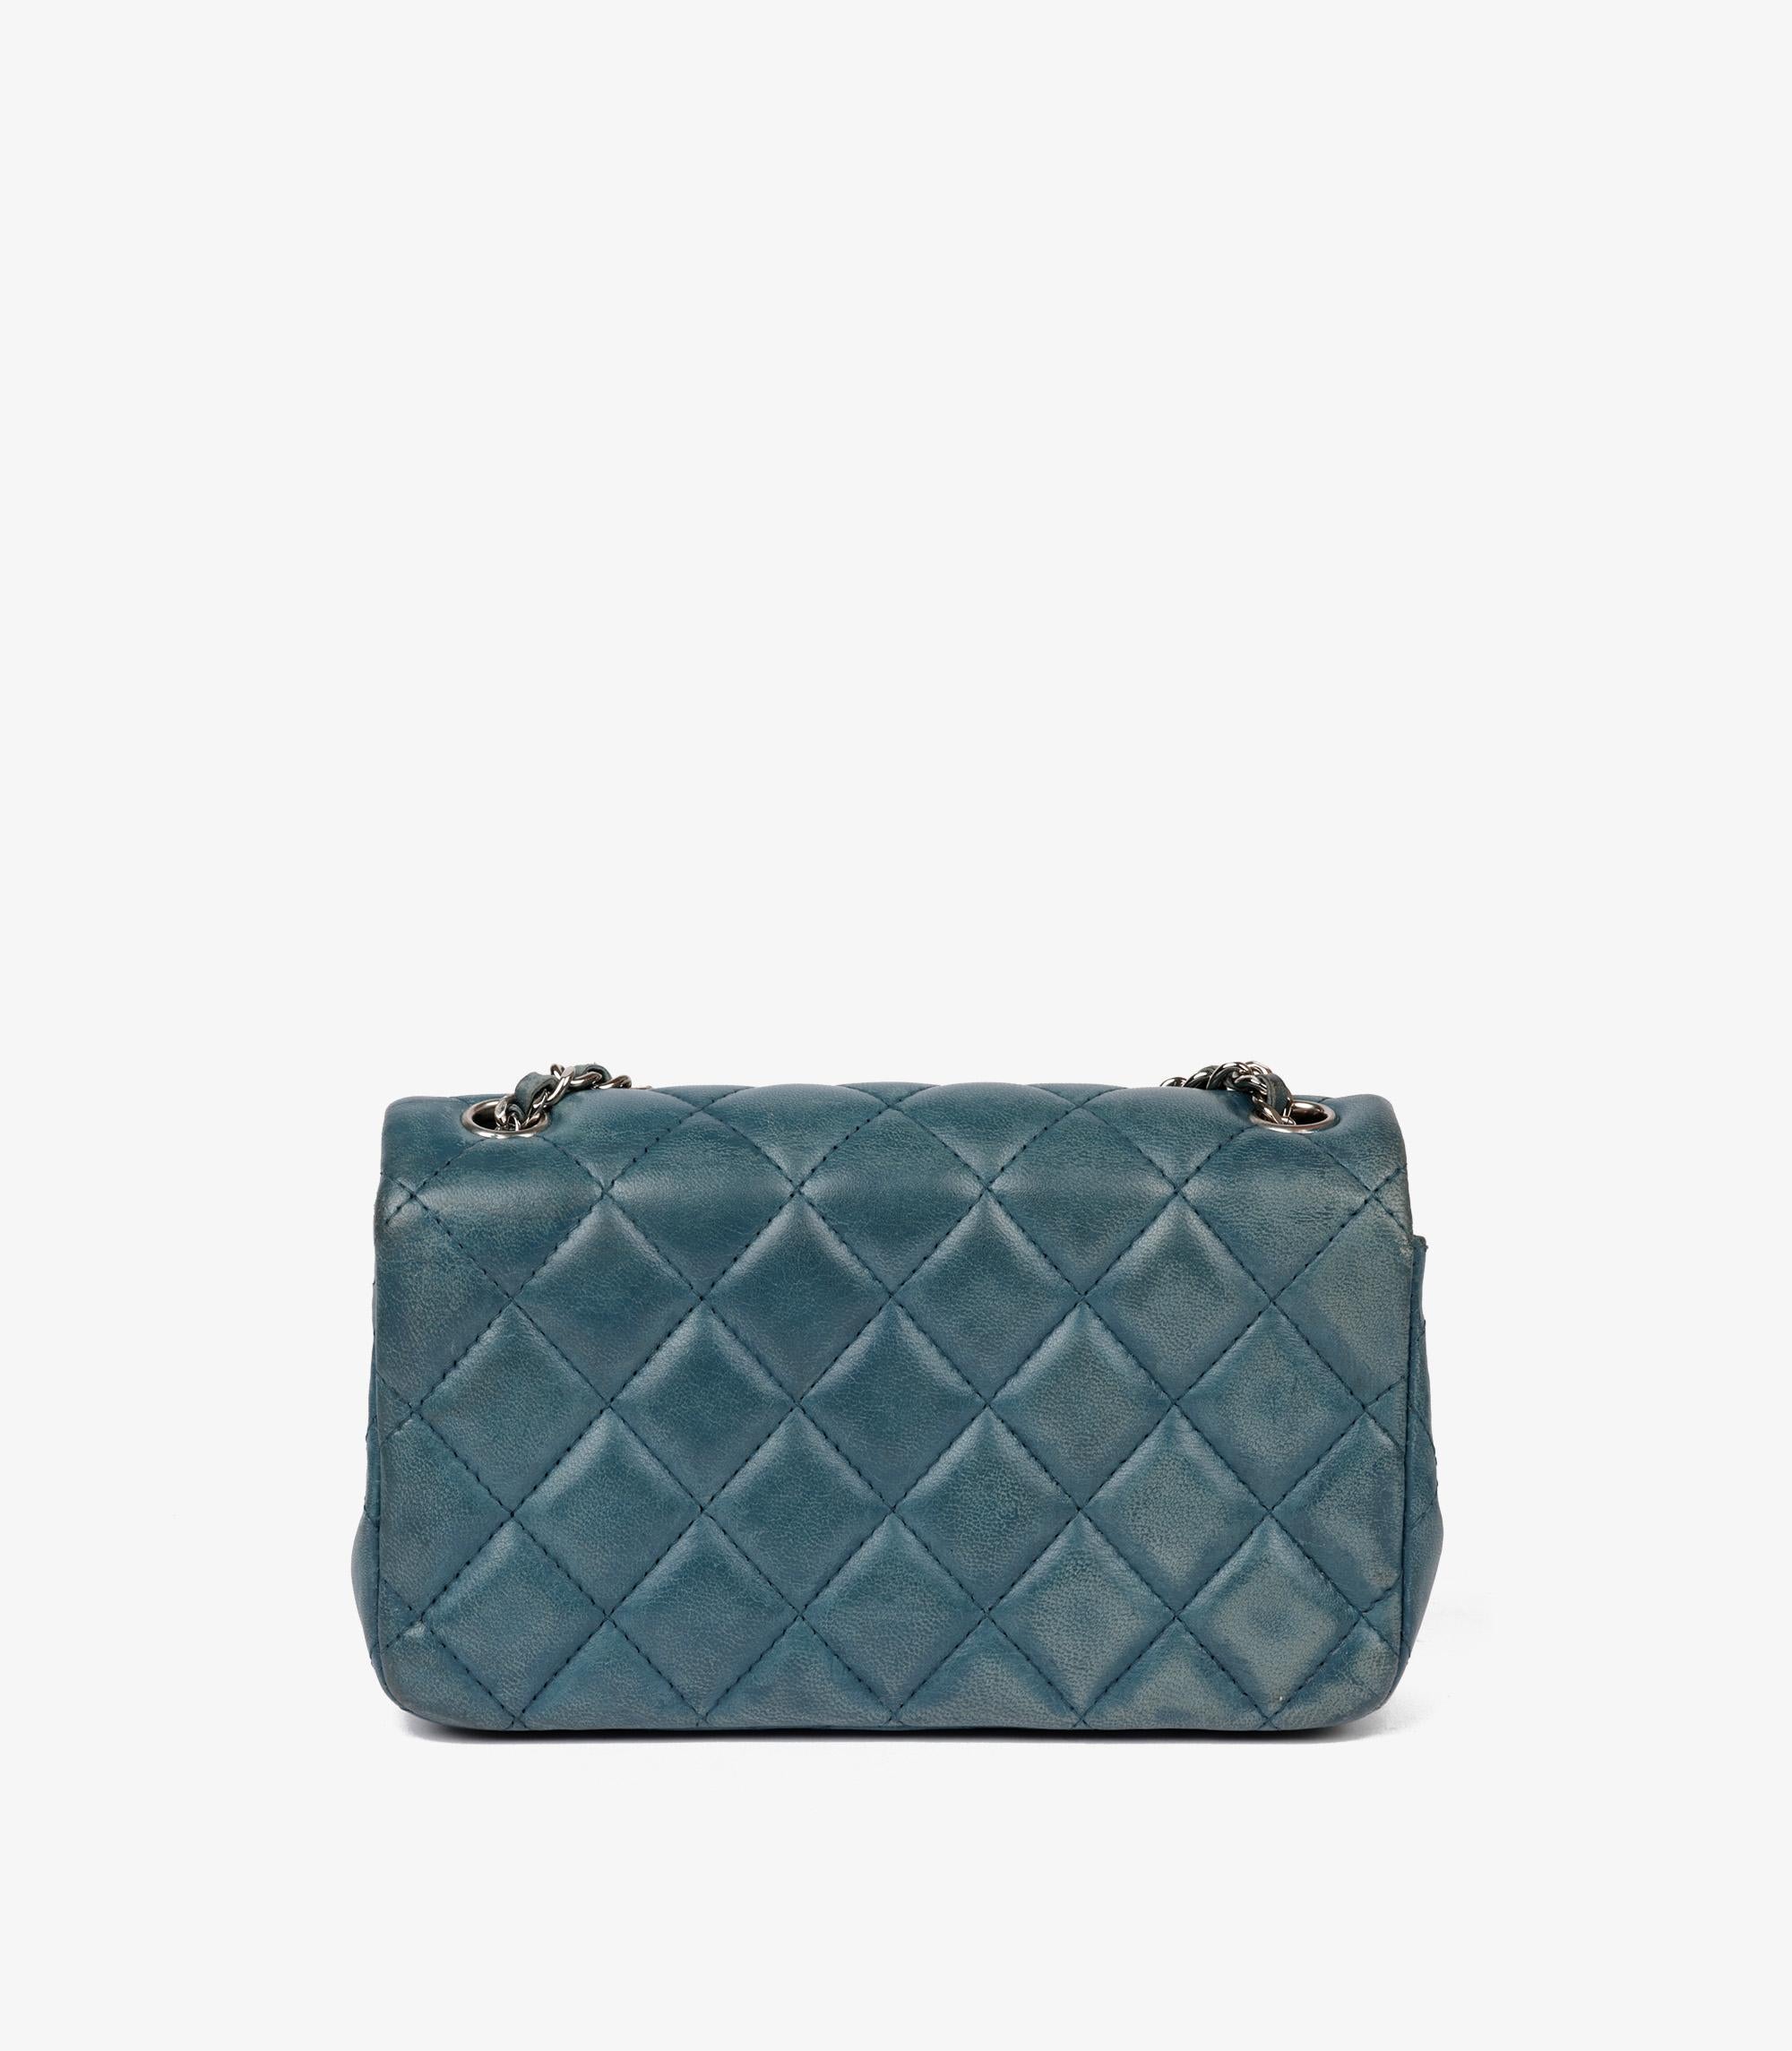 Chanel Teal Quilted Aged Lambskin Mini Rectangular Flap Bag For Sale 2